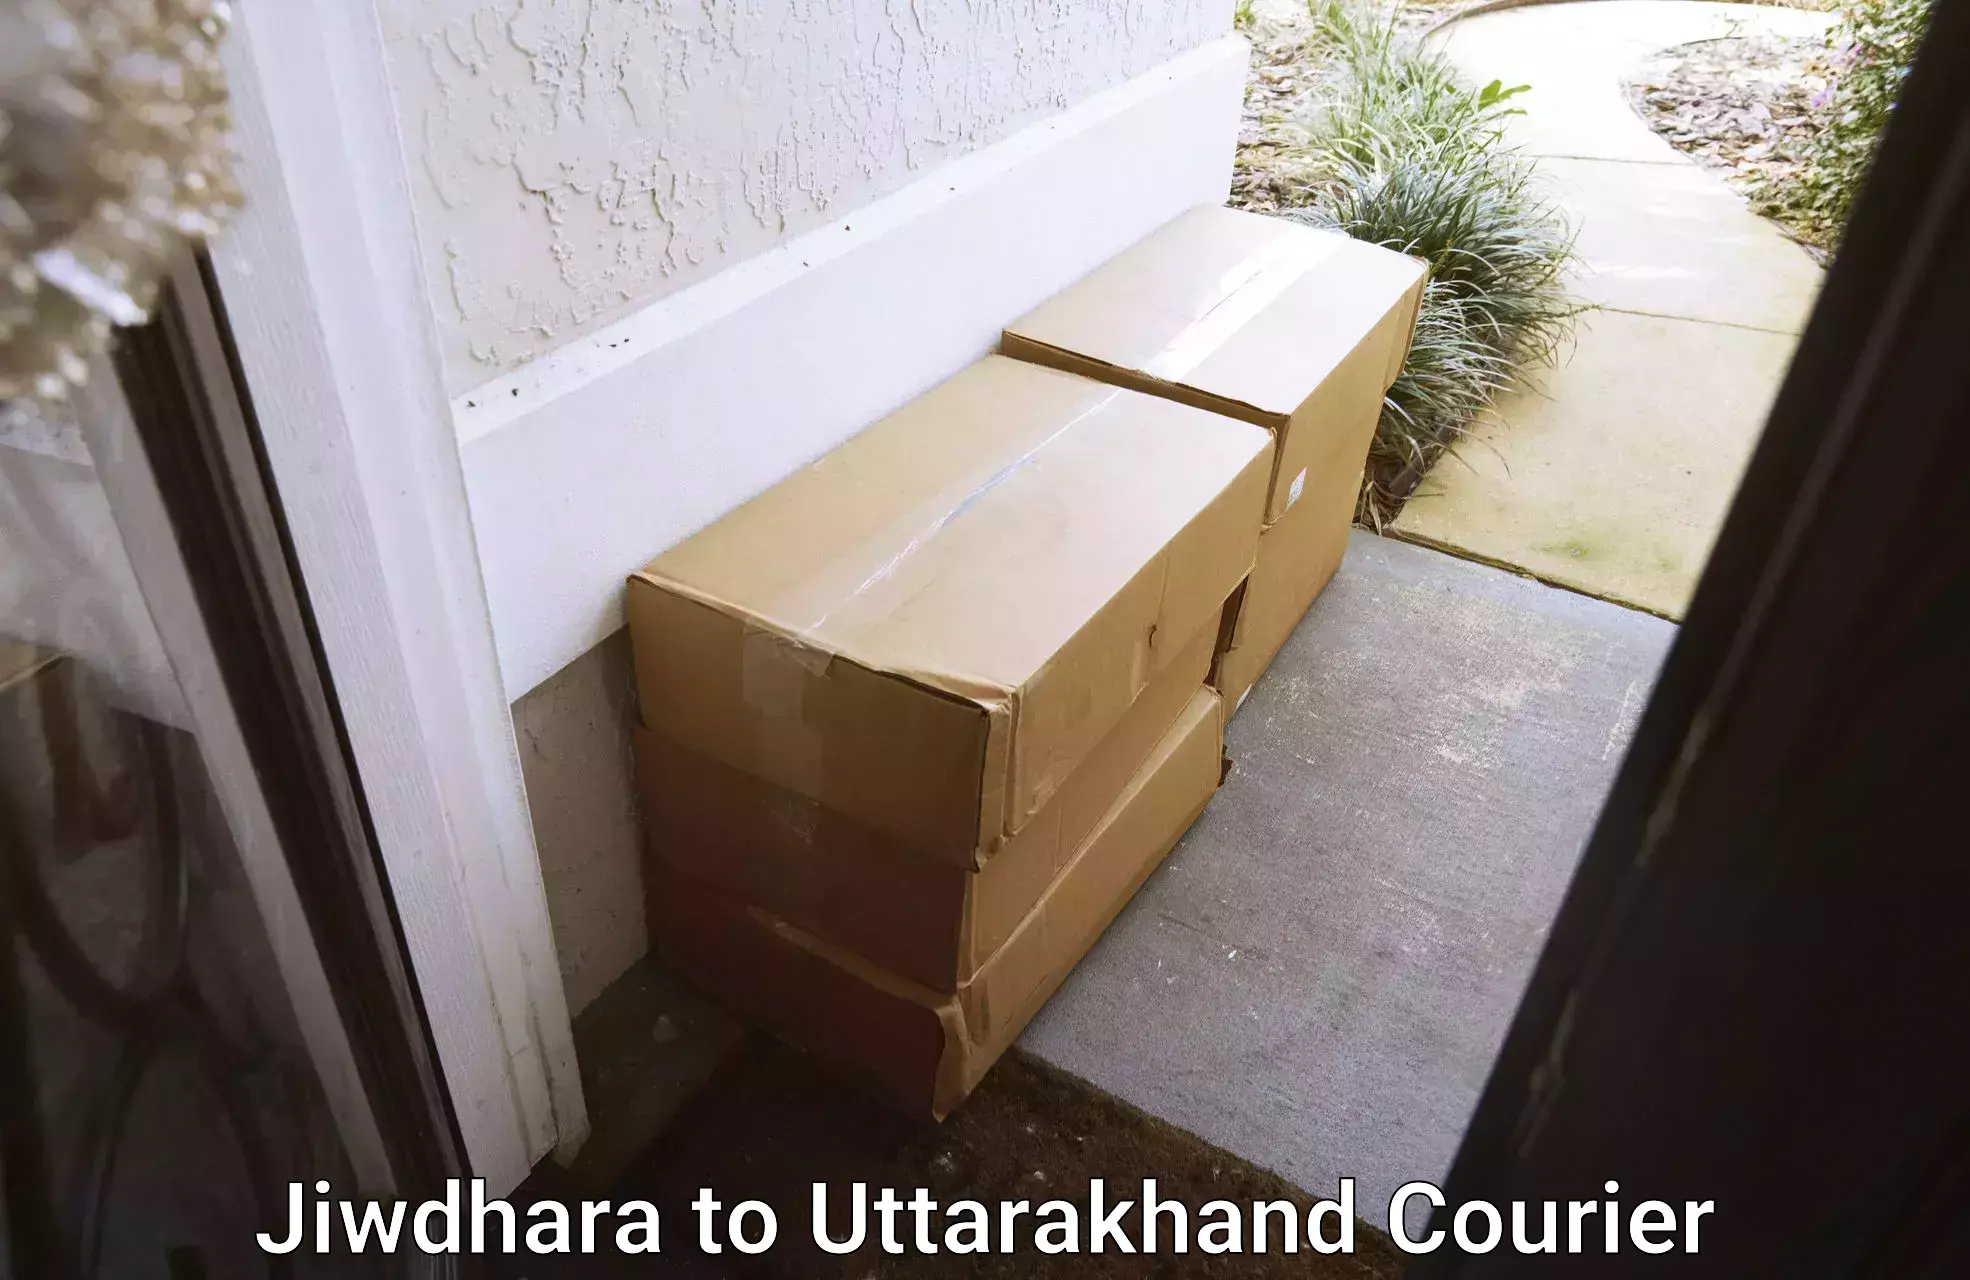 Packing and moving services in Jiwdhara to Rishikesh